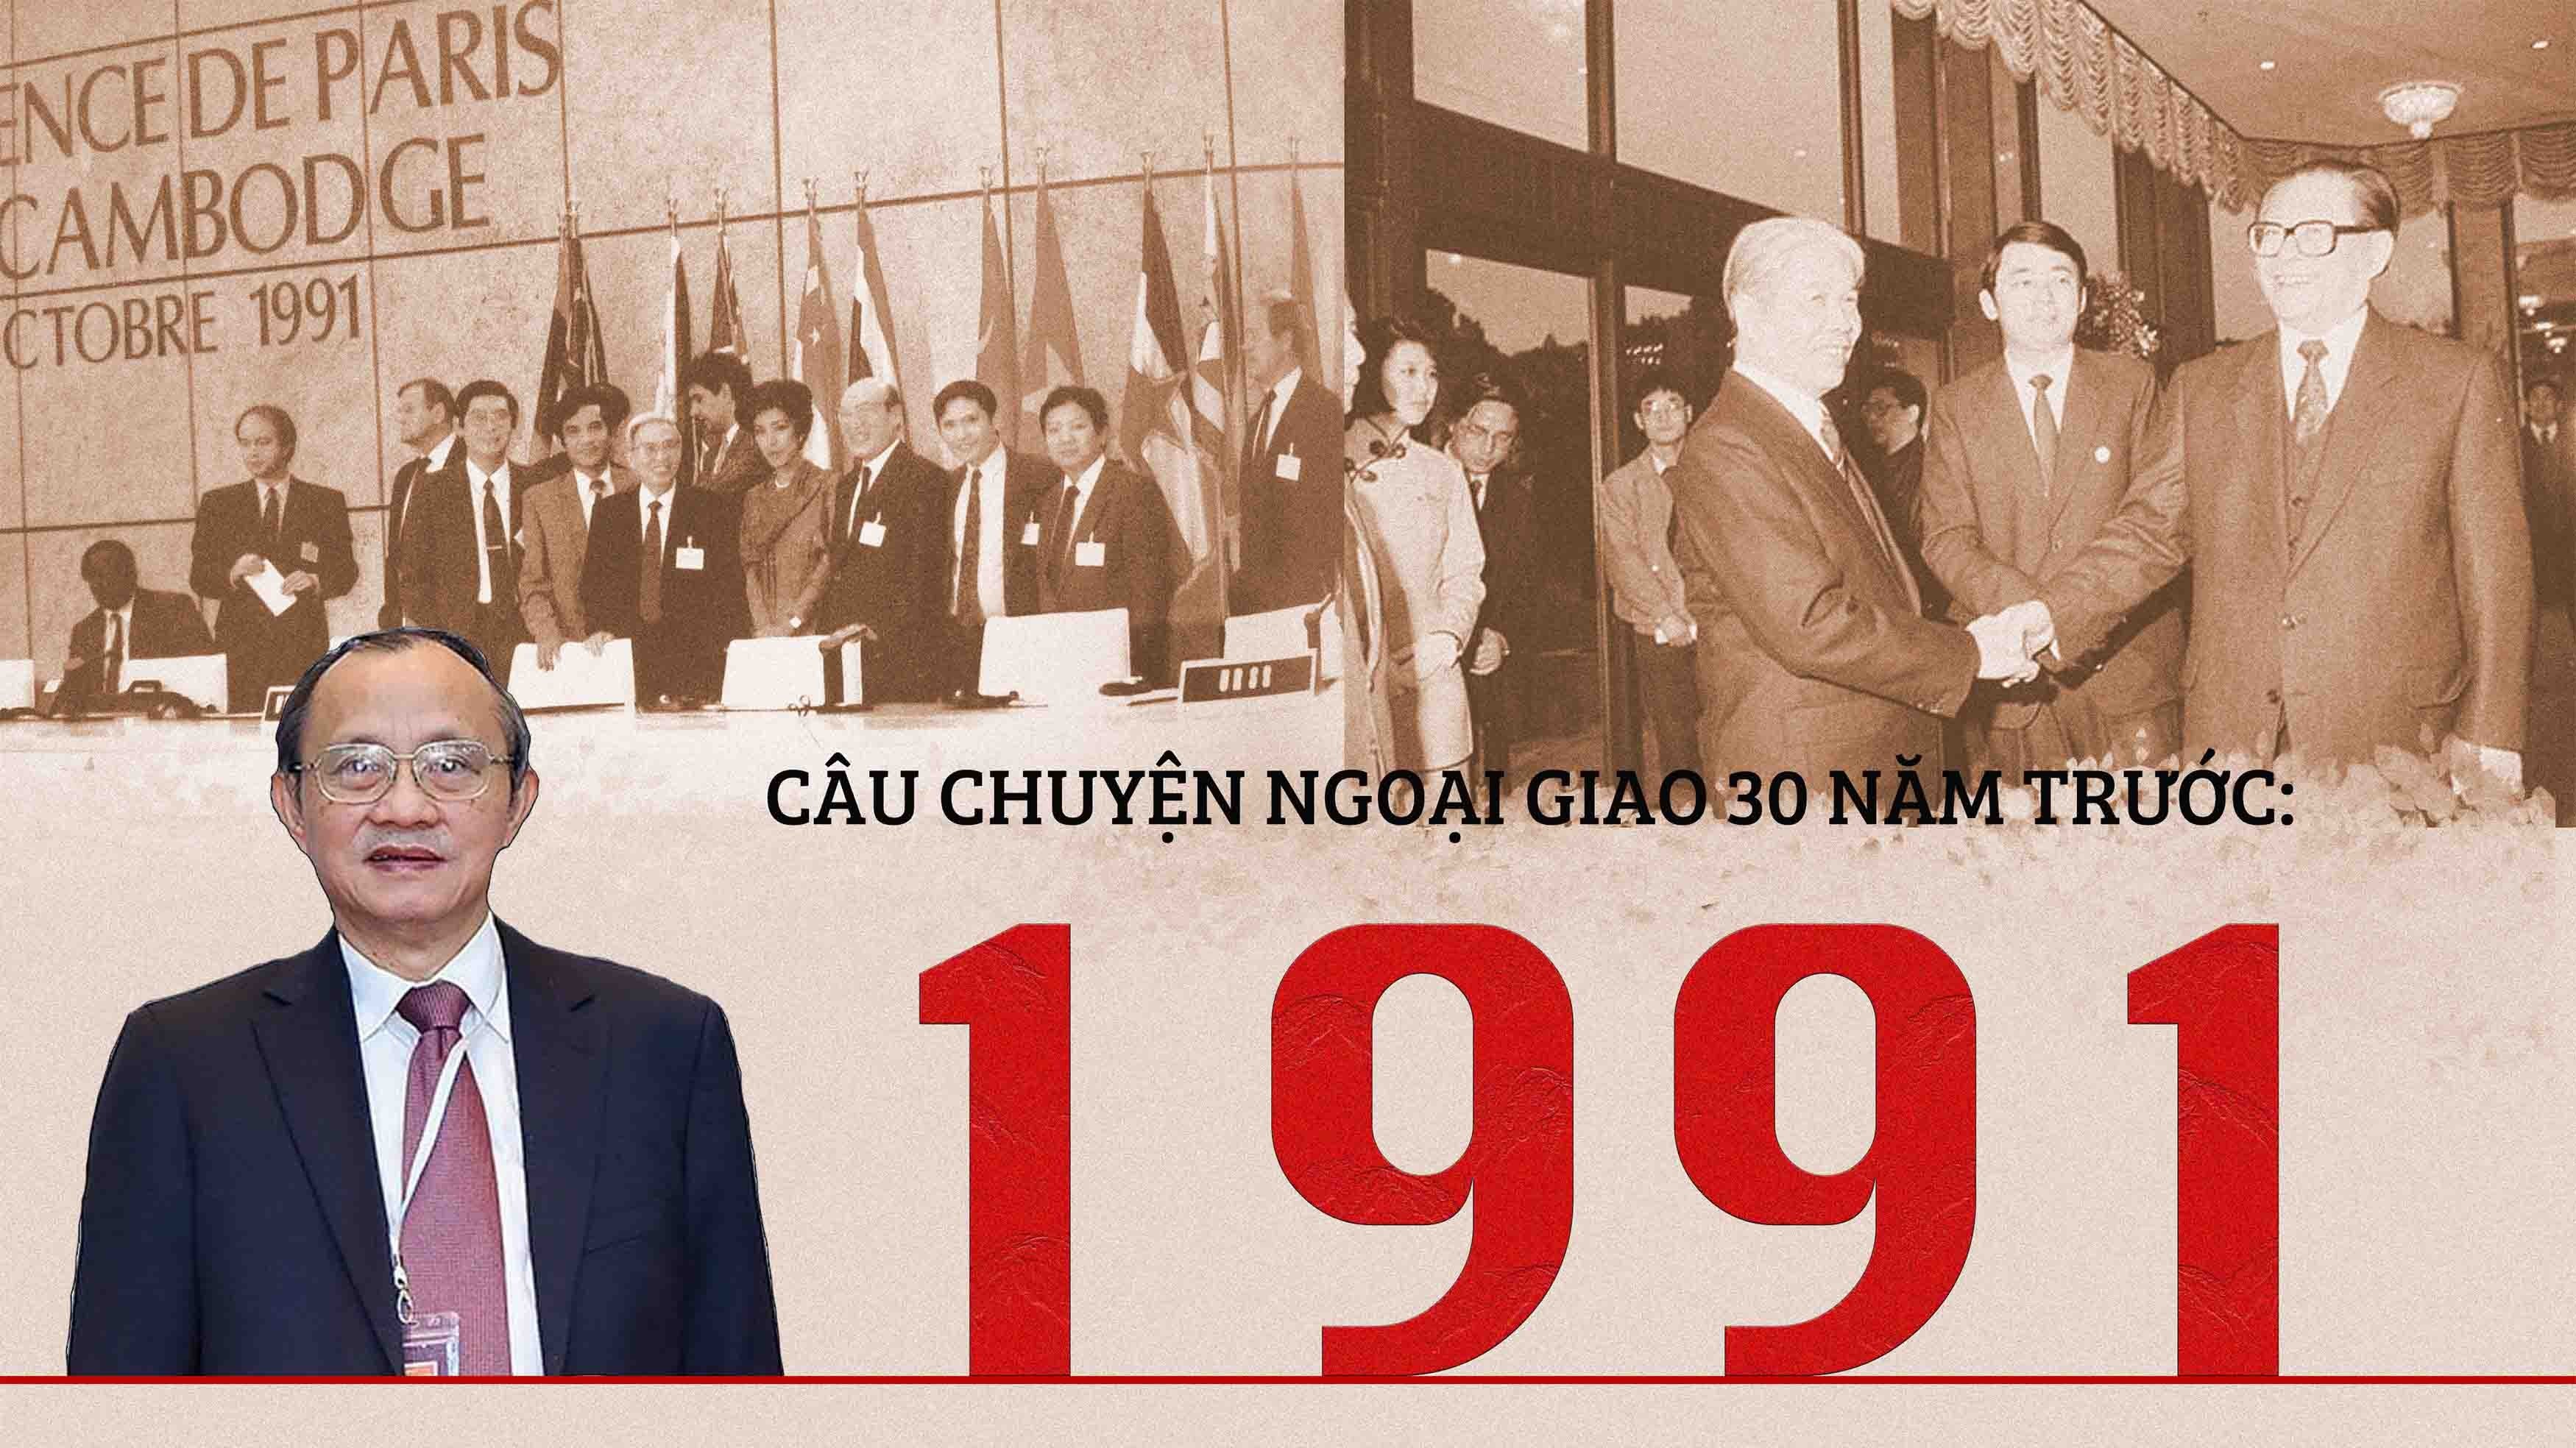 nam 1991 thich ung dung luc truoc bien dong